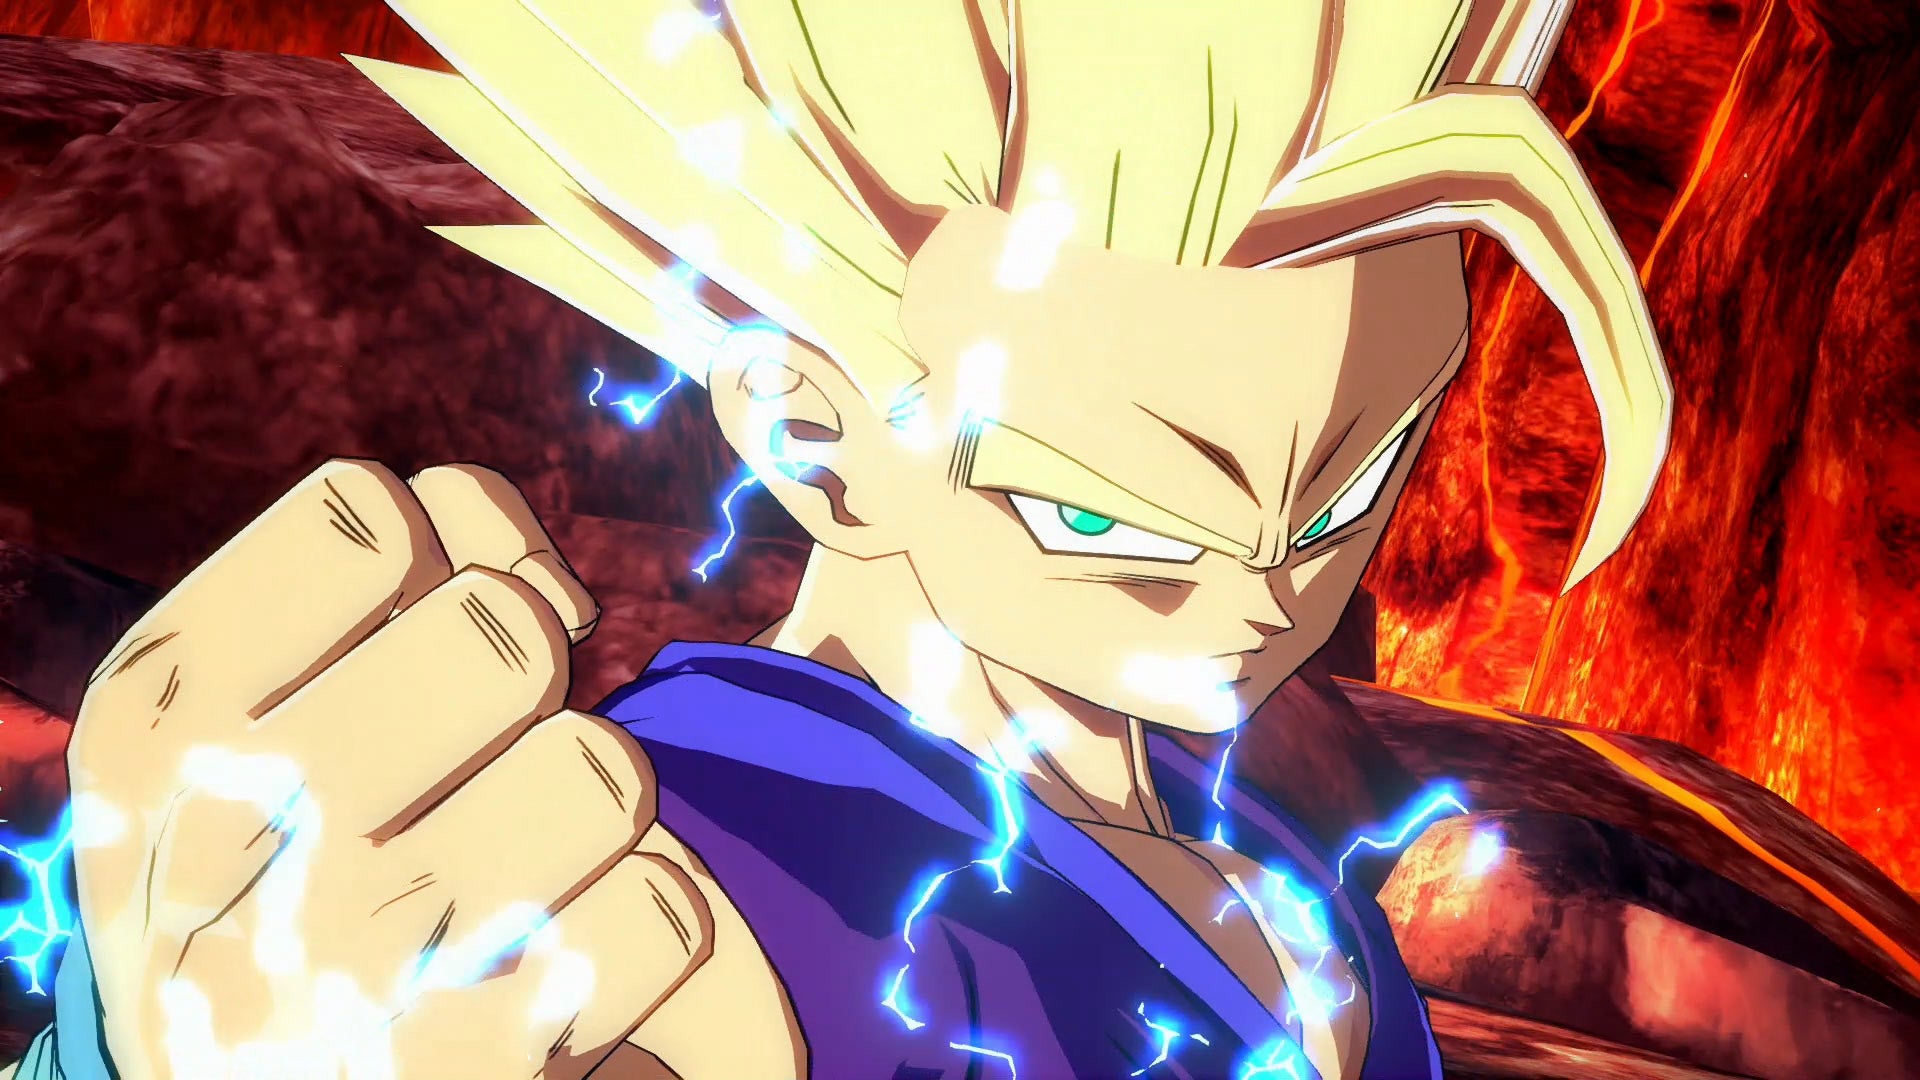 Teen Gohan in Dragonball FighterZ gearing up for a fight